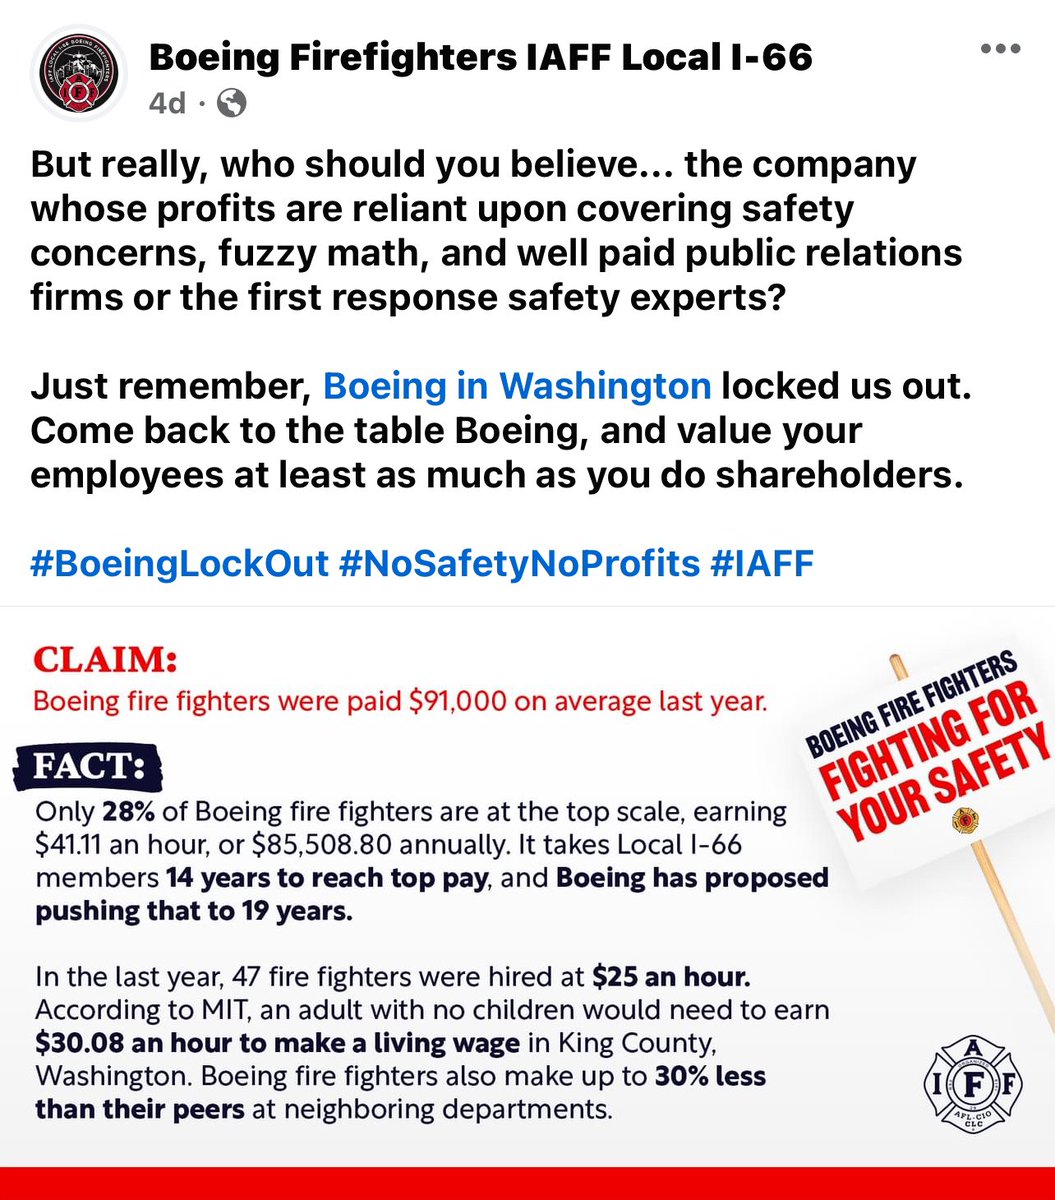 Did you know Boeing locked the doors on Washington firefighters when they refused to accept unfair and unsafe contract terms?

Let’s show these first responders just how much support they have from their neighbors to the east!

#BoeingLockOut #Boeing #IAFF #nosafetynoprofits